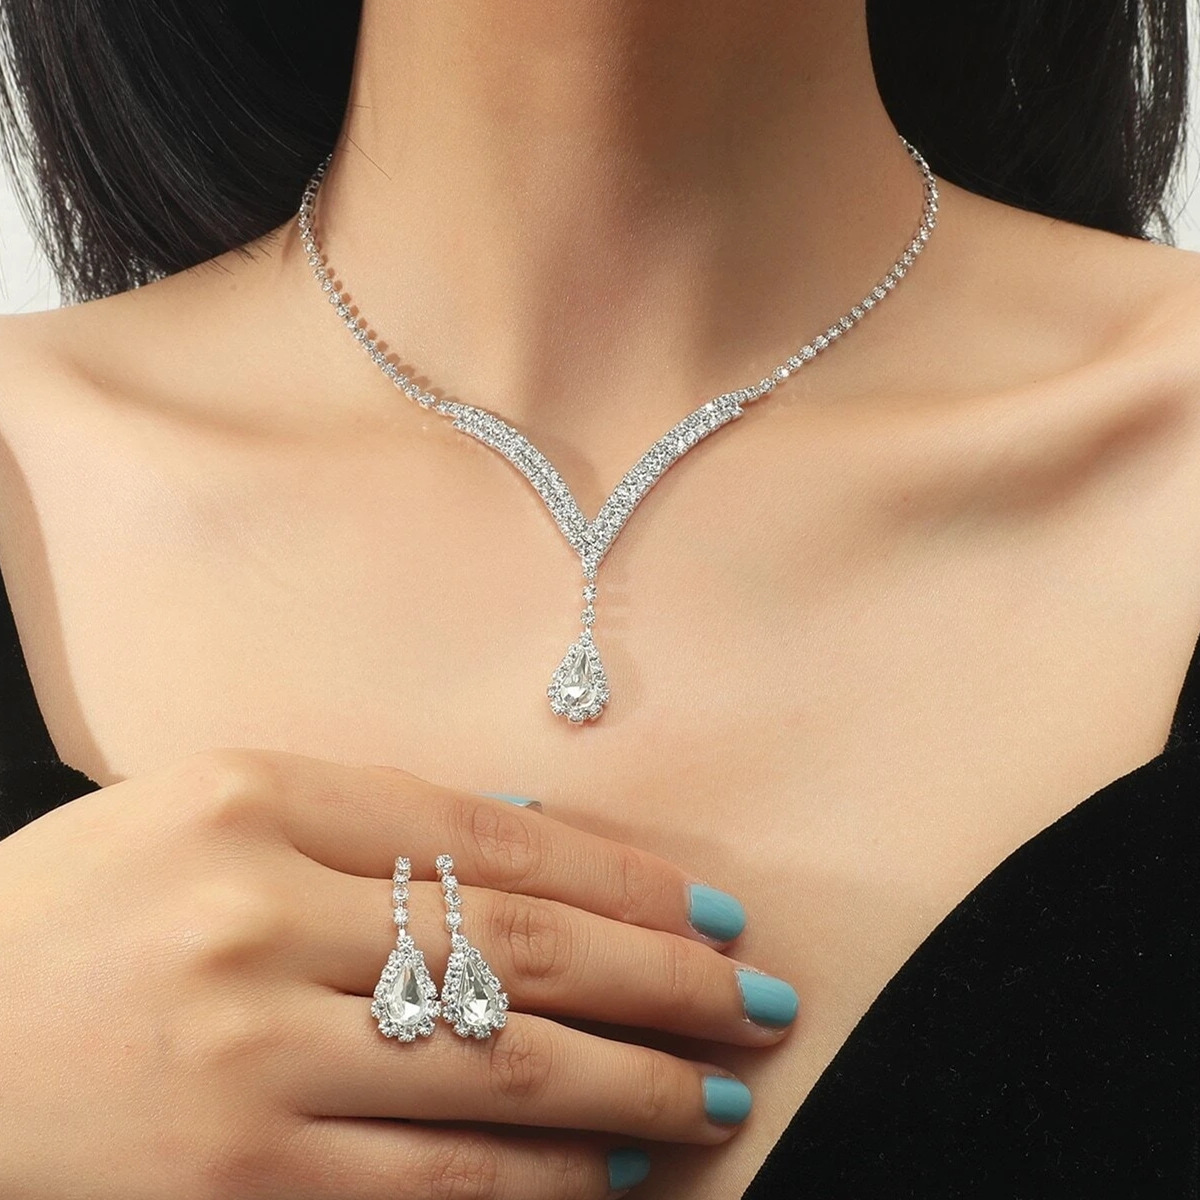 European And American Drop Pendant Necklace Earring Jewelry Sets Wedding Jewelry Set Bridal 2464